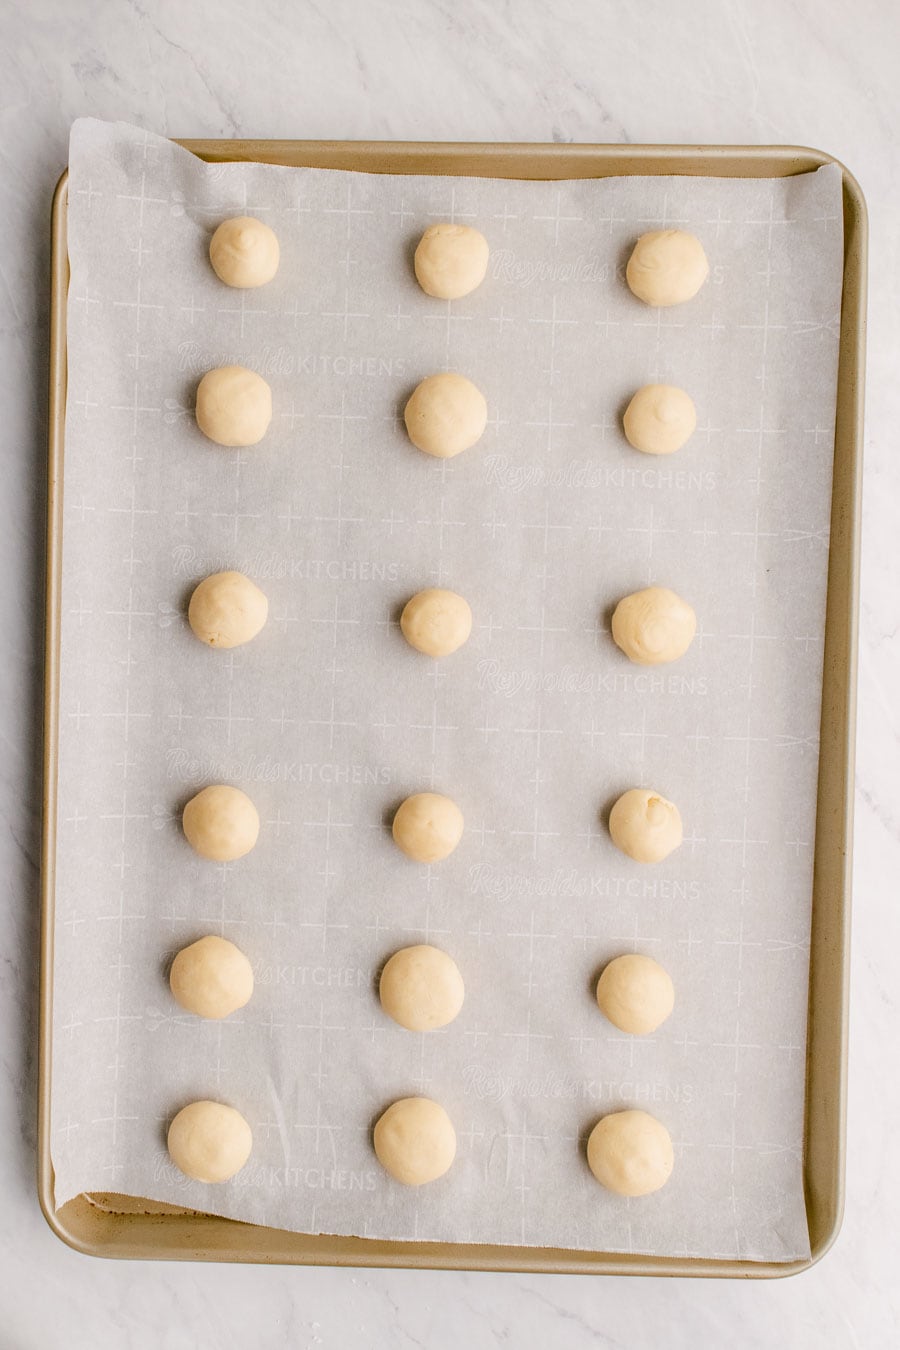 Melt away cookie dough balls on a sheet pan lined with parchment paper  ready to bake.